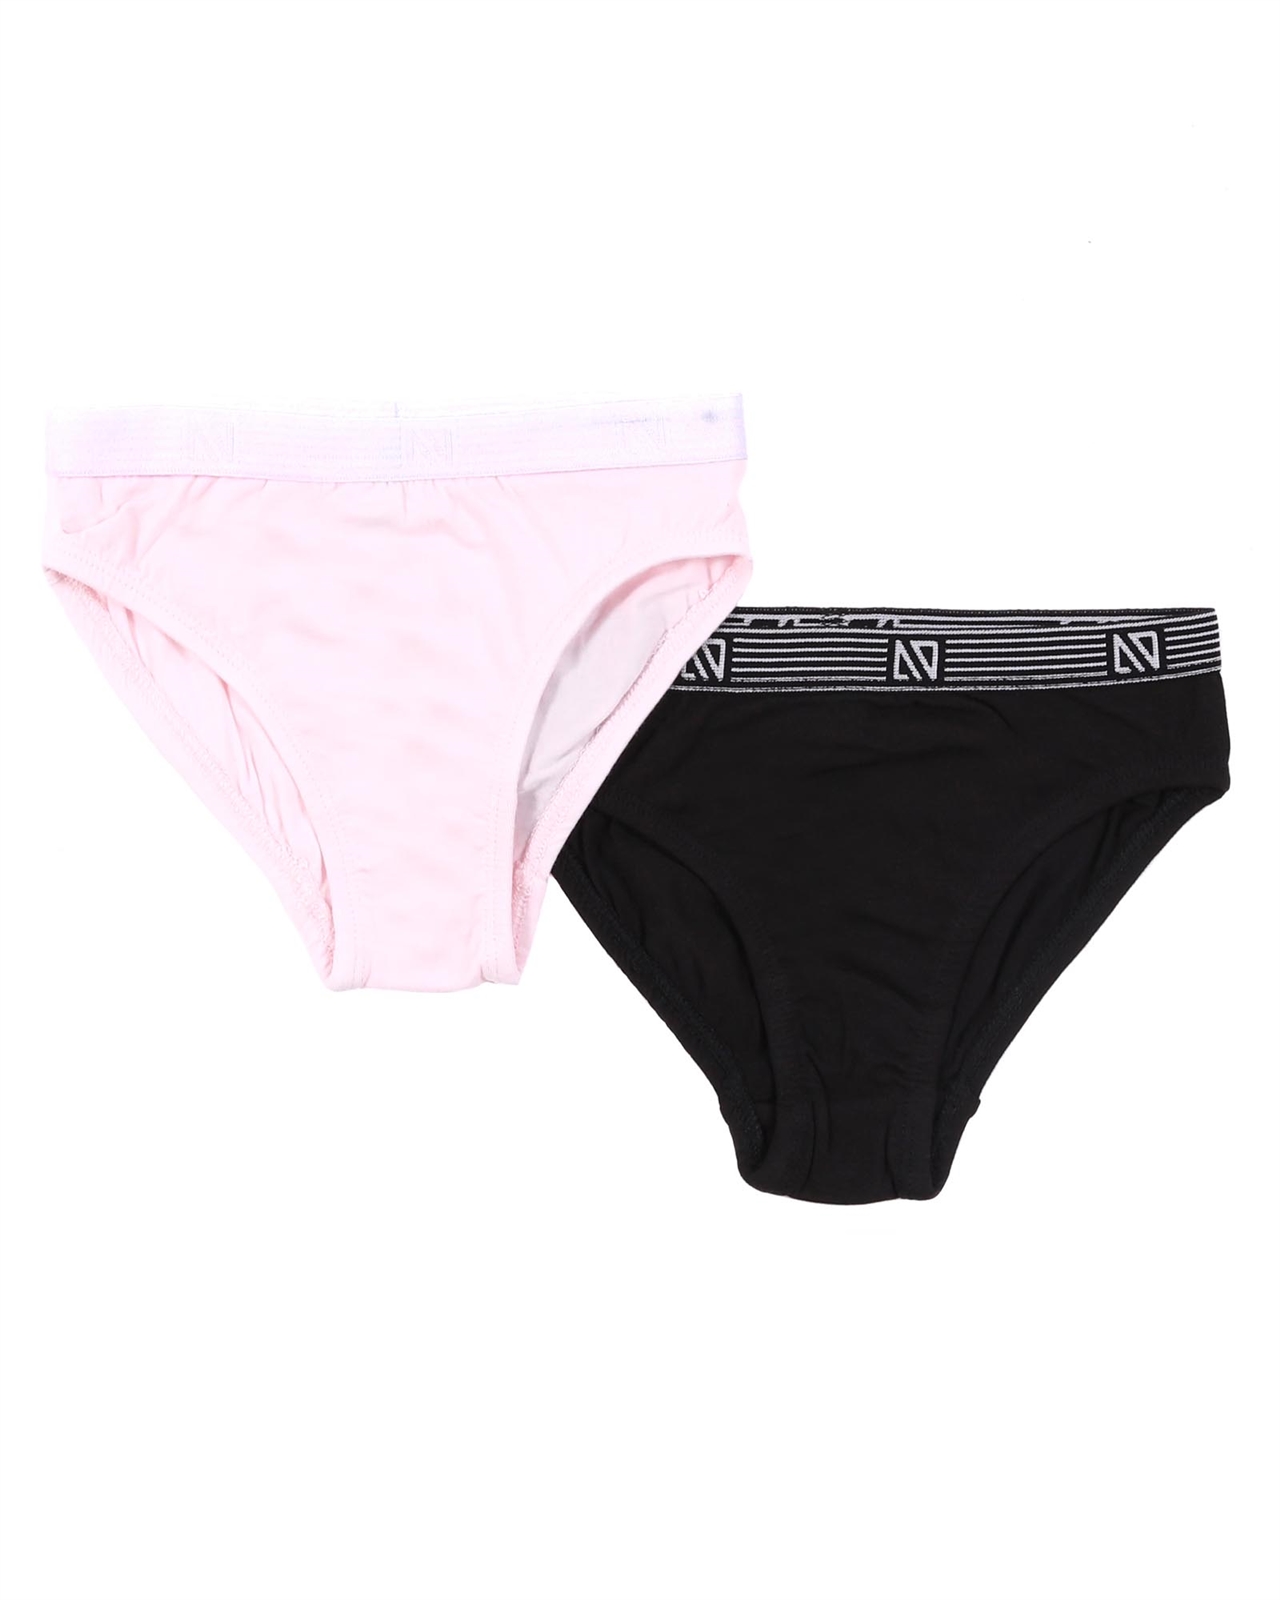 Black Full Brief Cotton Blend Knickers 6 Pack